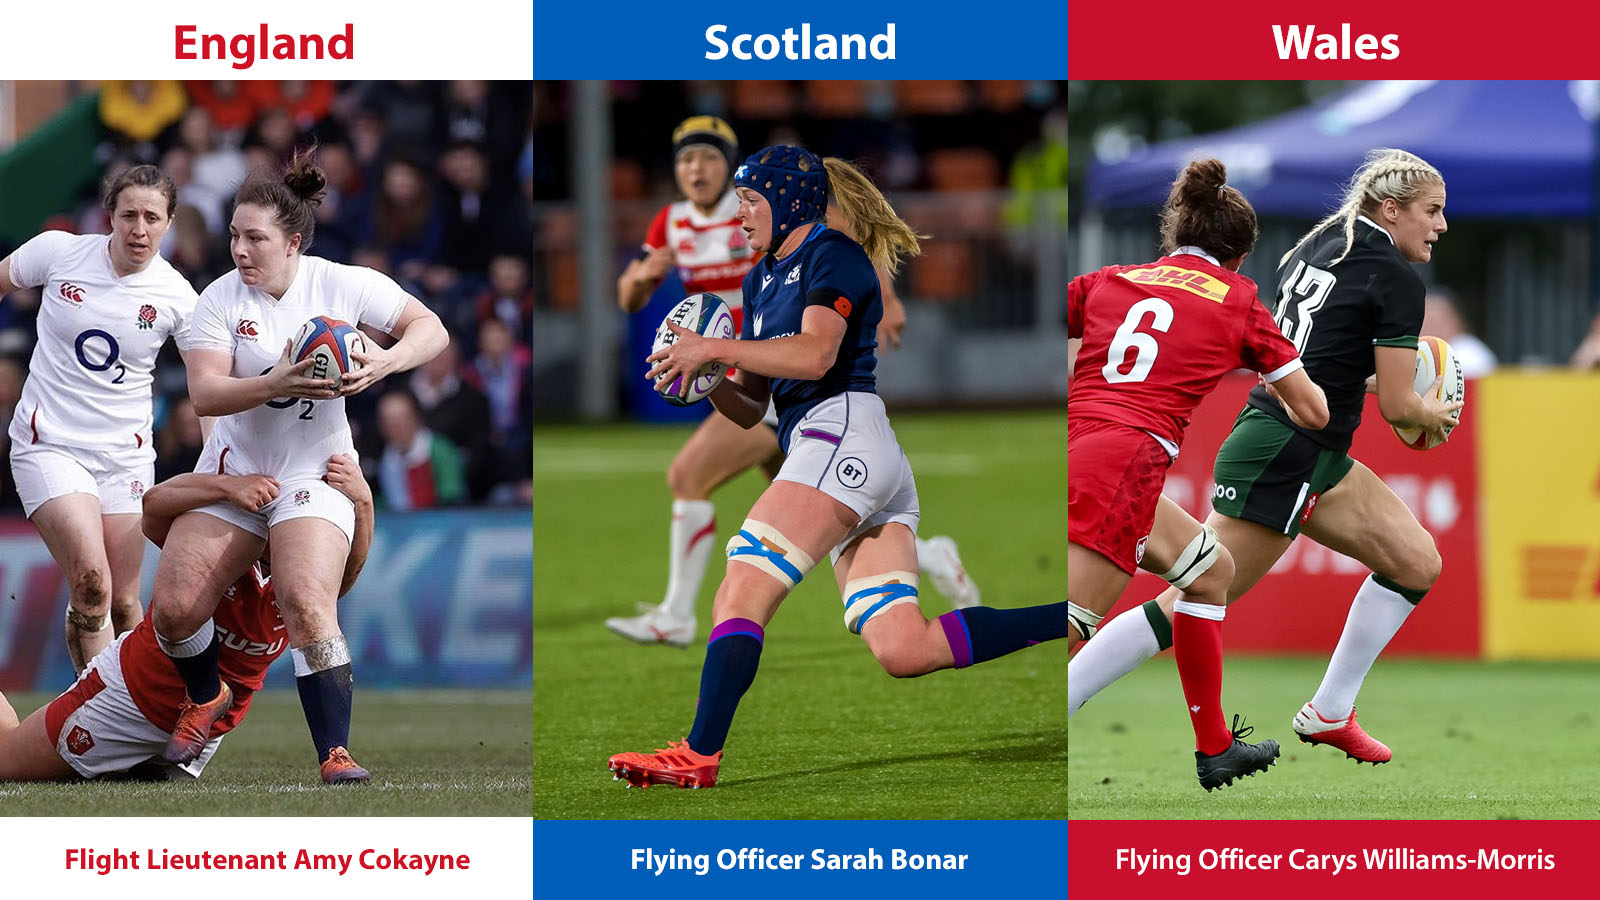 Graphic shows three images of female rugby players between headers that show their country and name.